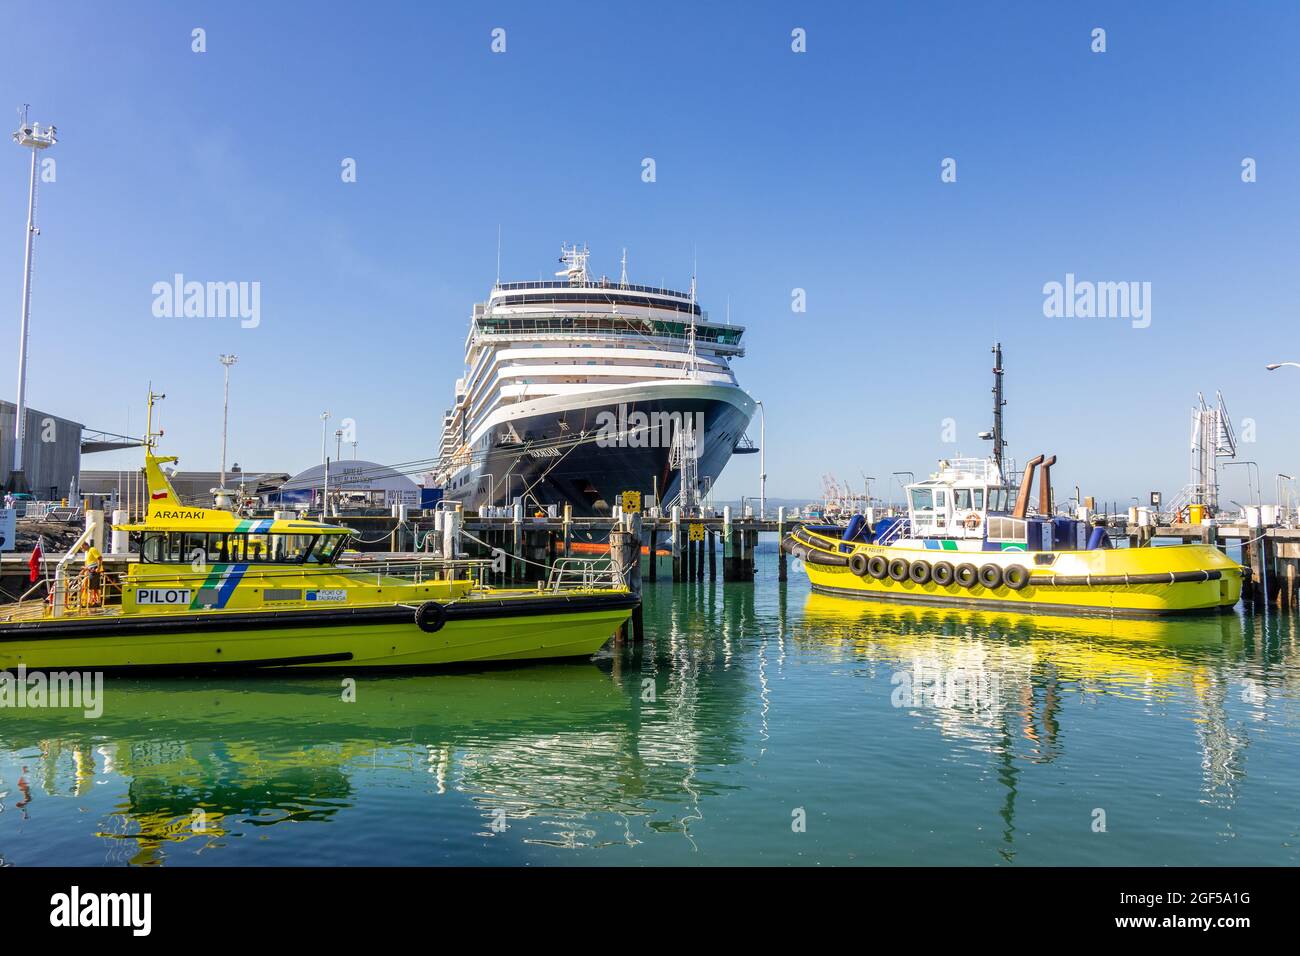 Holland America Cruise Ship Noordam In Tauranga Port New Zealand Pilot Boats Moored In Front Of Noordam Stock Photo